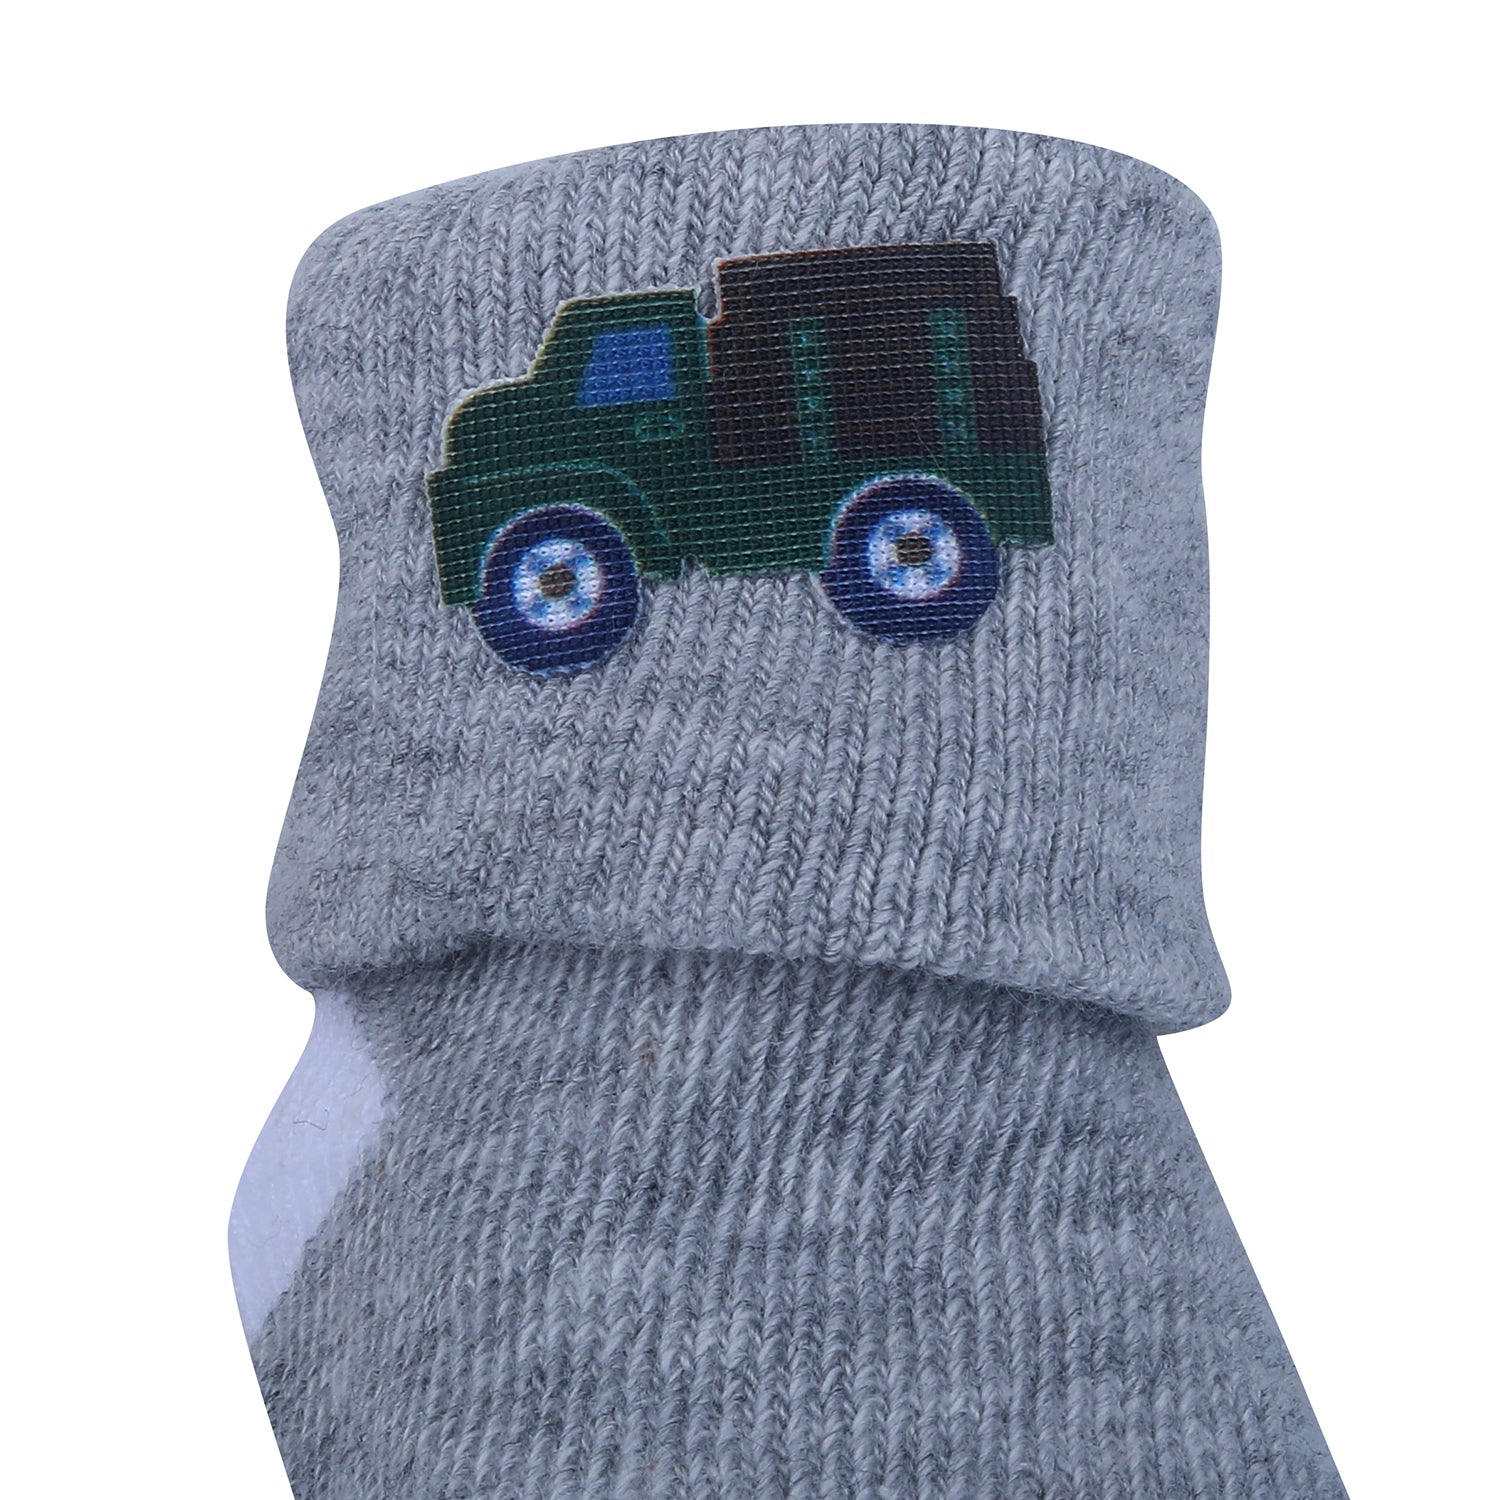 Baby Moo Truck And Stripes Newborn Breathable Infant Cotton Socks - Grey - Baby Moo